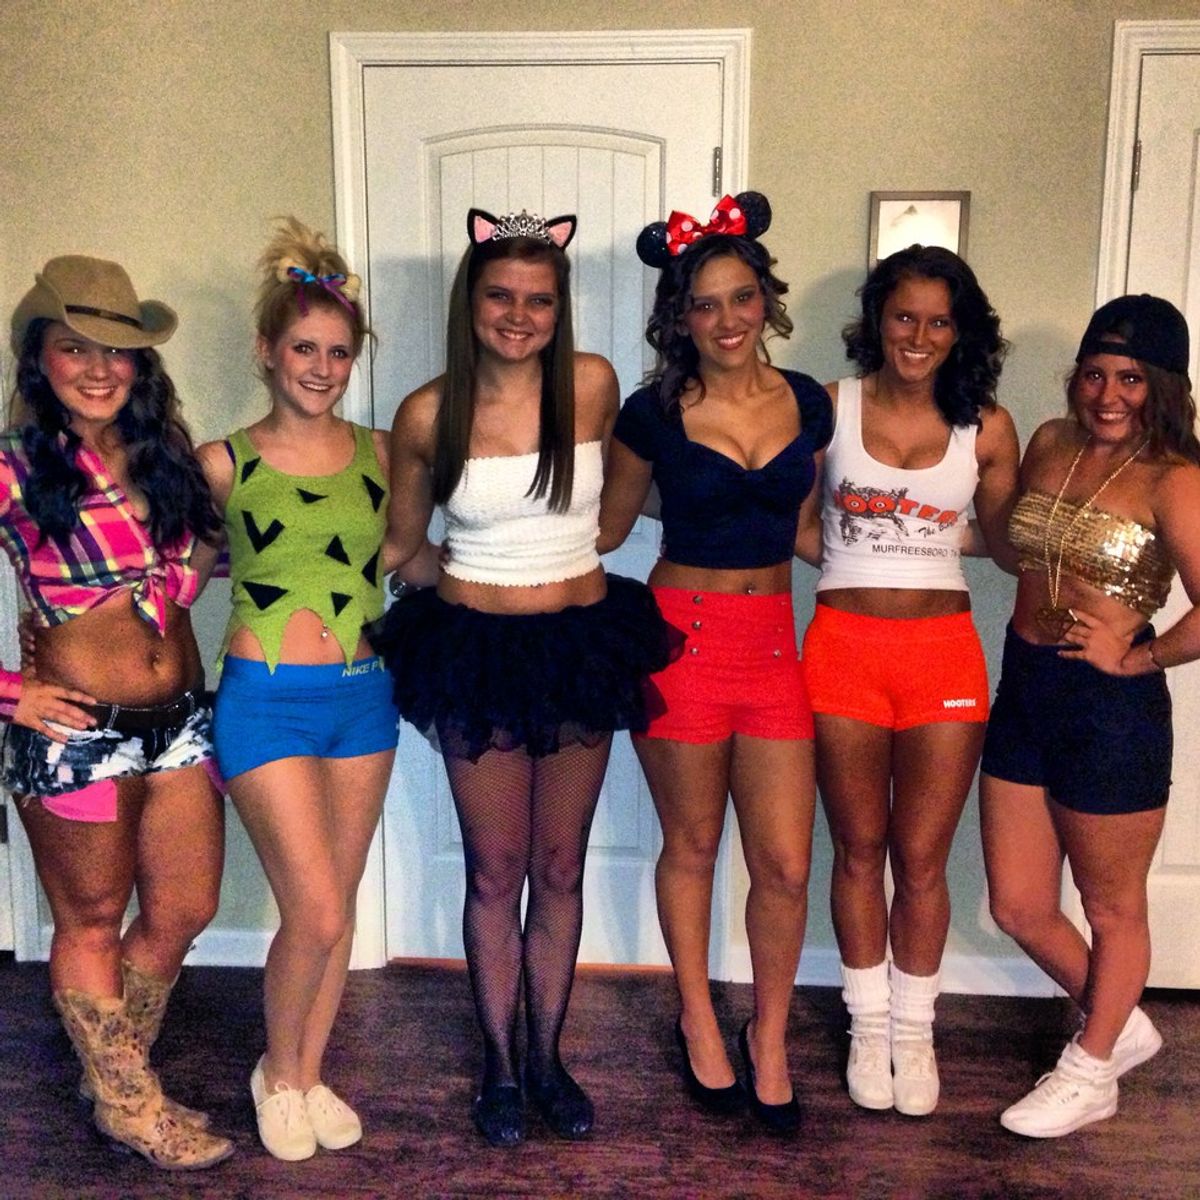 11 Costumes You Probably Saw On Your Campus This Weekend